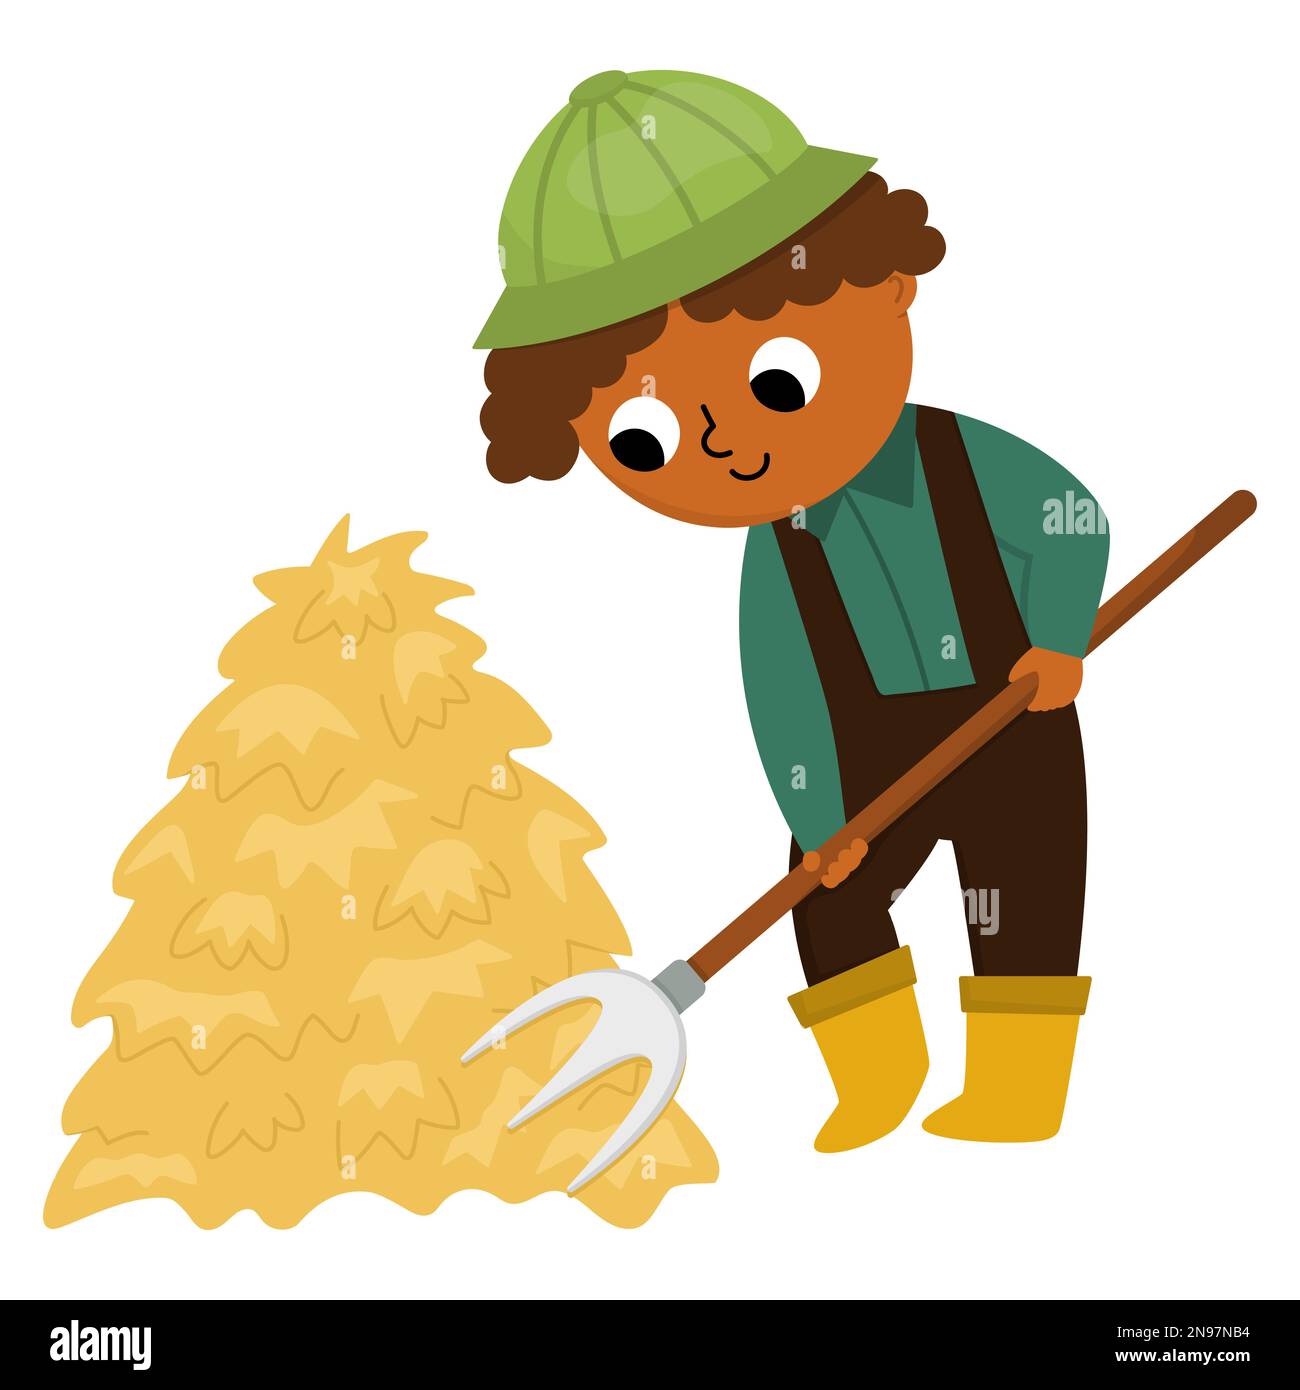 Vector farmer with hayfork icon. Cute kid doing agricultural work. Rural country character. Child gathering hay. Funny farm illustration with cartoon Stock Vector